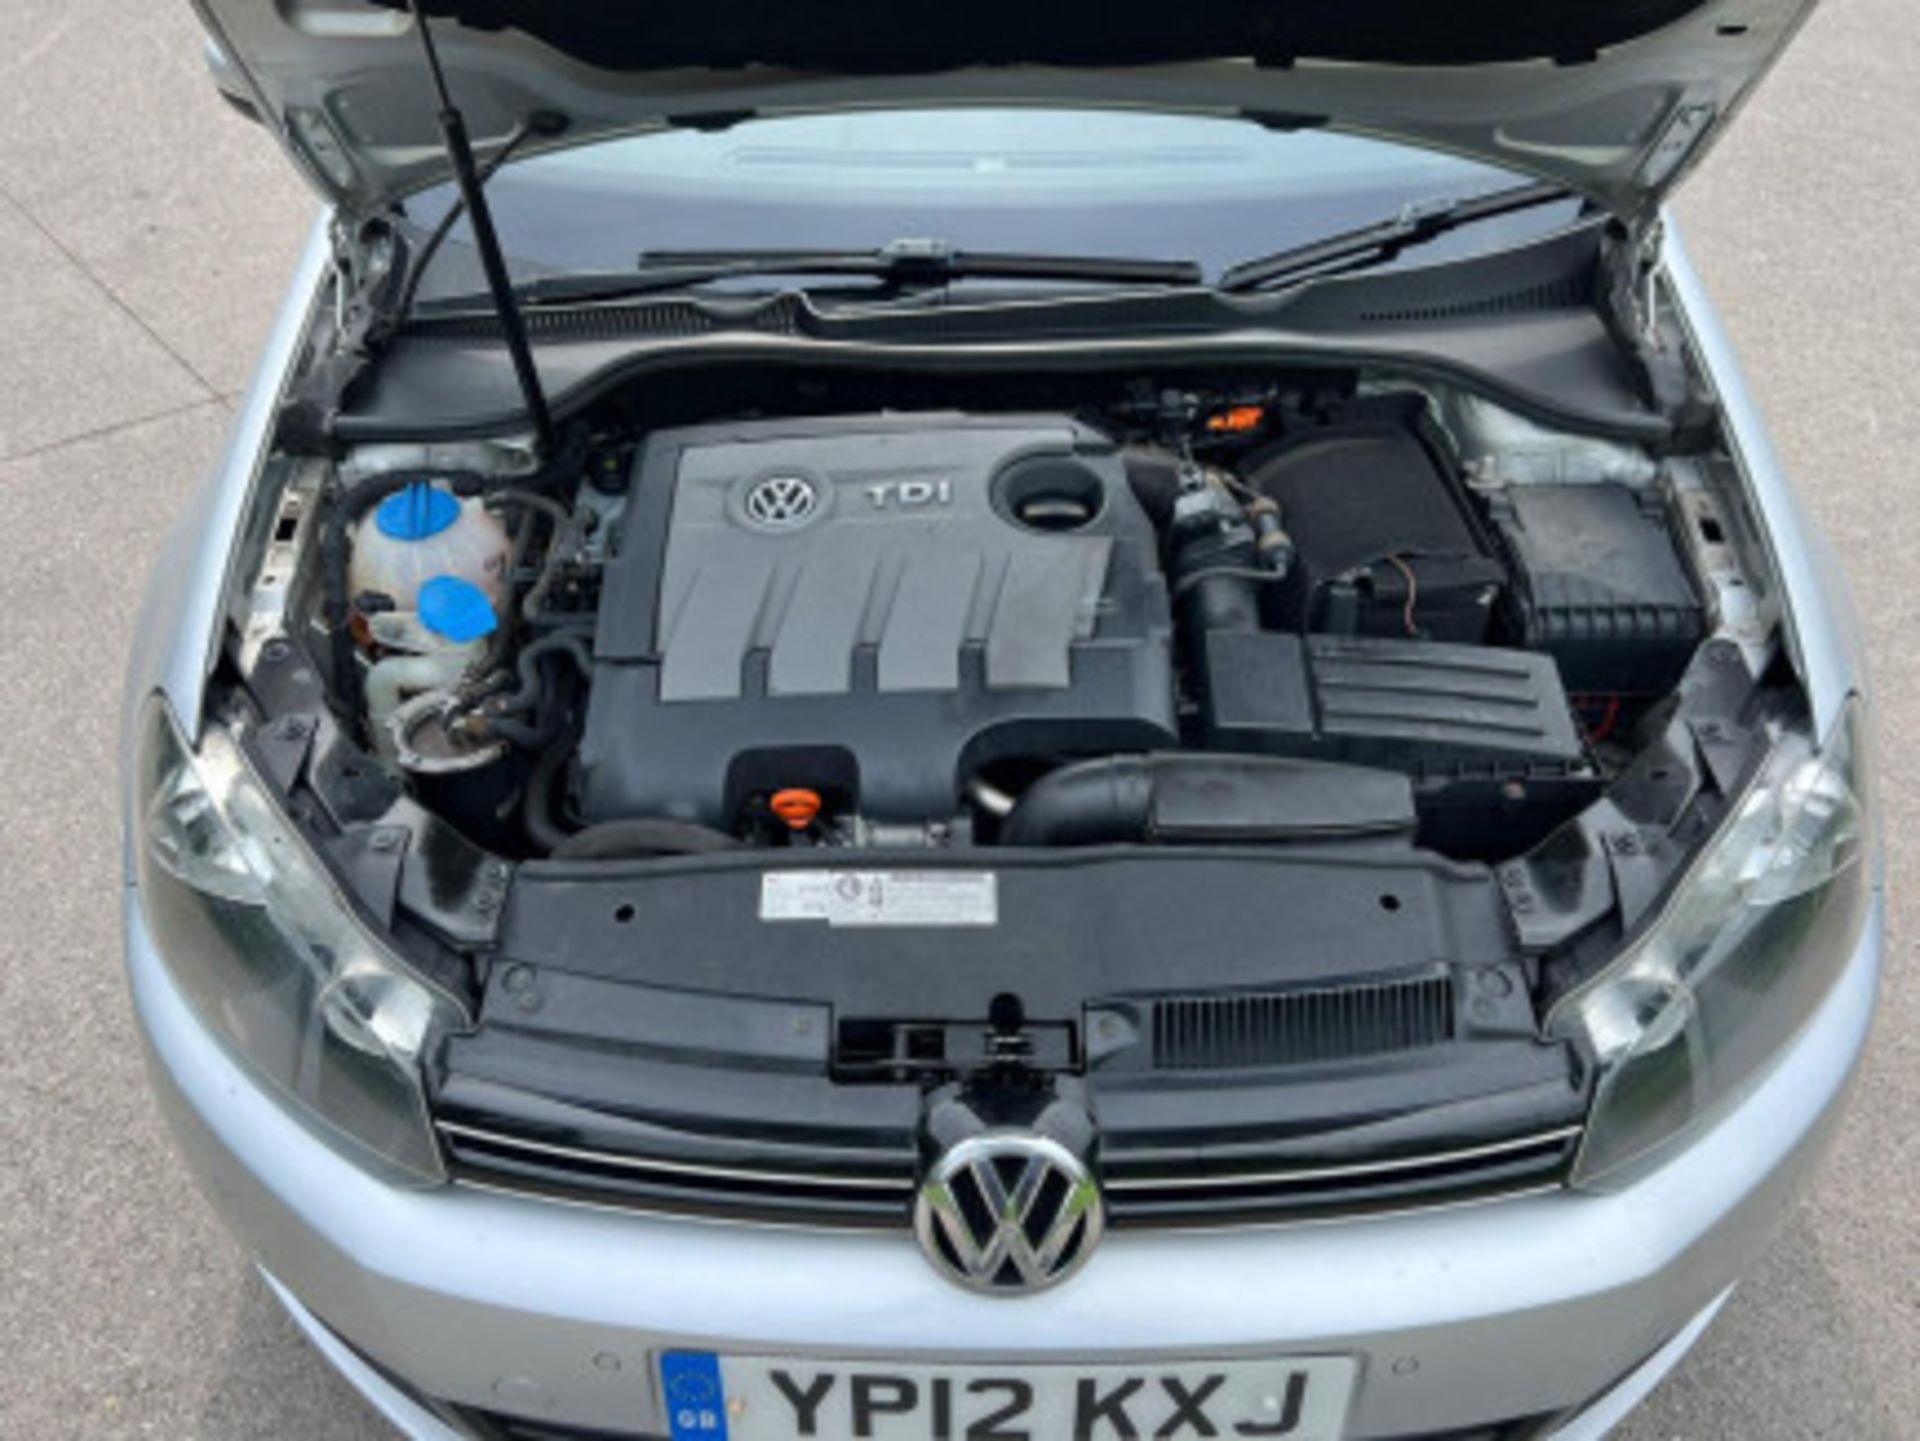 IMPECCABLE 2012 VOLKSWAGEN GOLF 1.6 TDI MATCH >>--NO VAT ON HAMMER--<< - Image 67 of 116